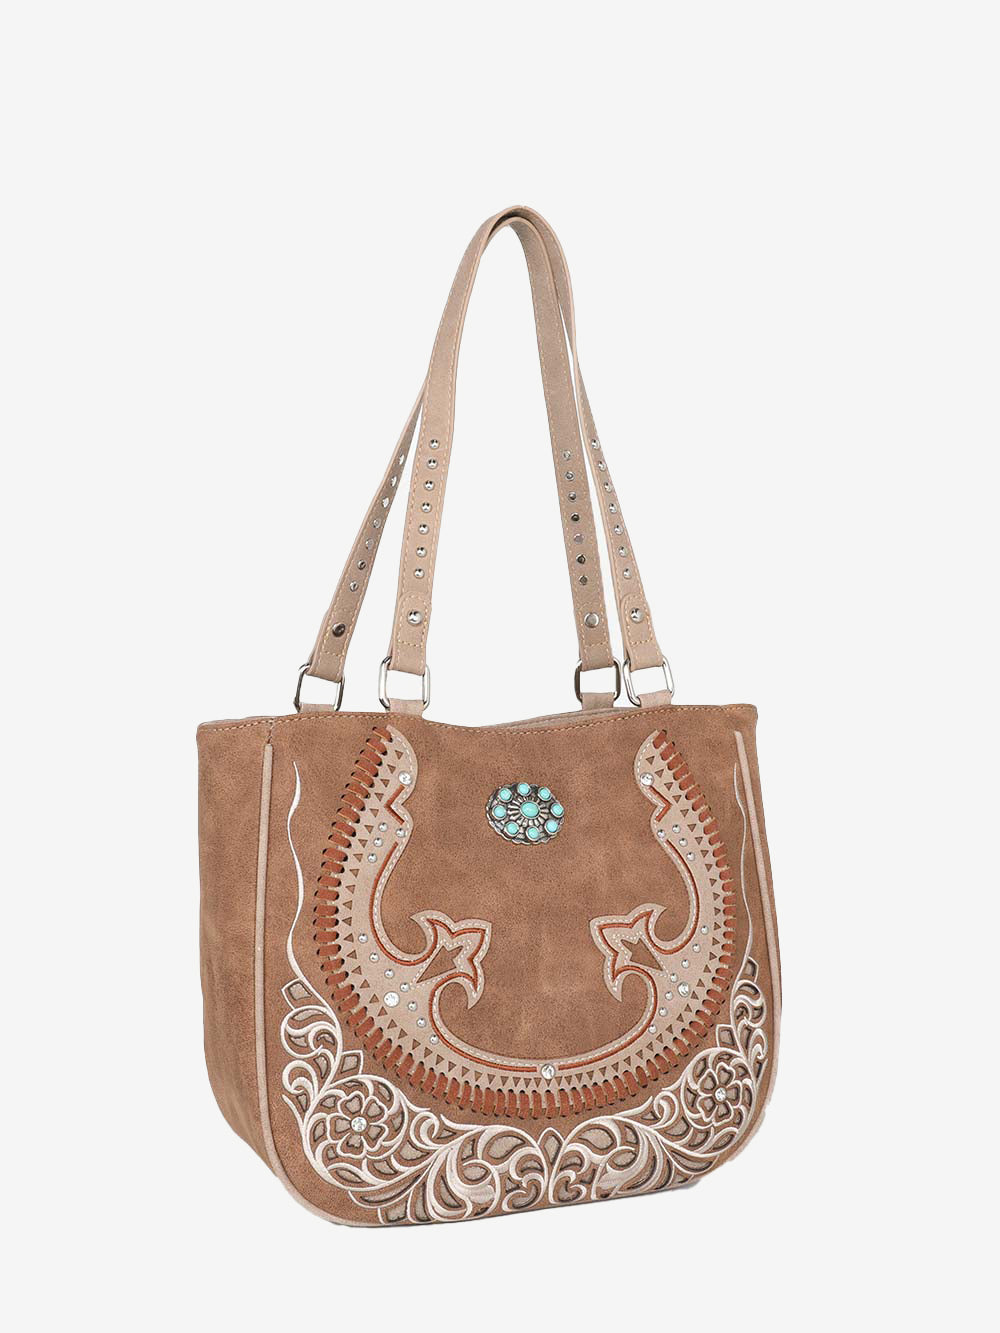 Montana West Cut-out Turquoise Stone Concho Tote Bag - Montana West World